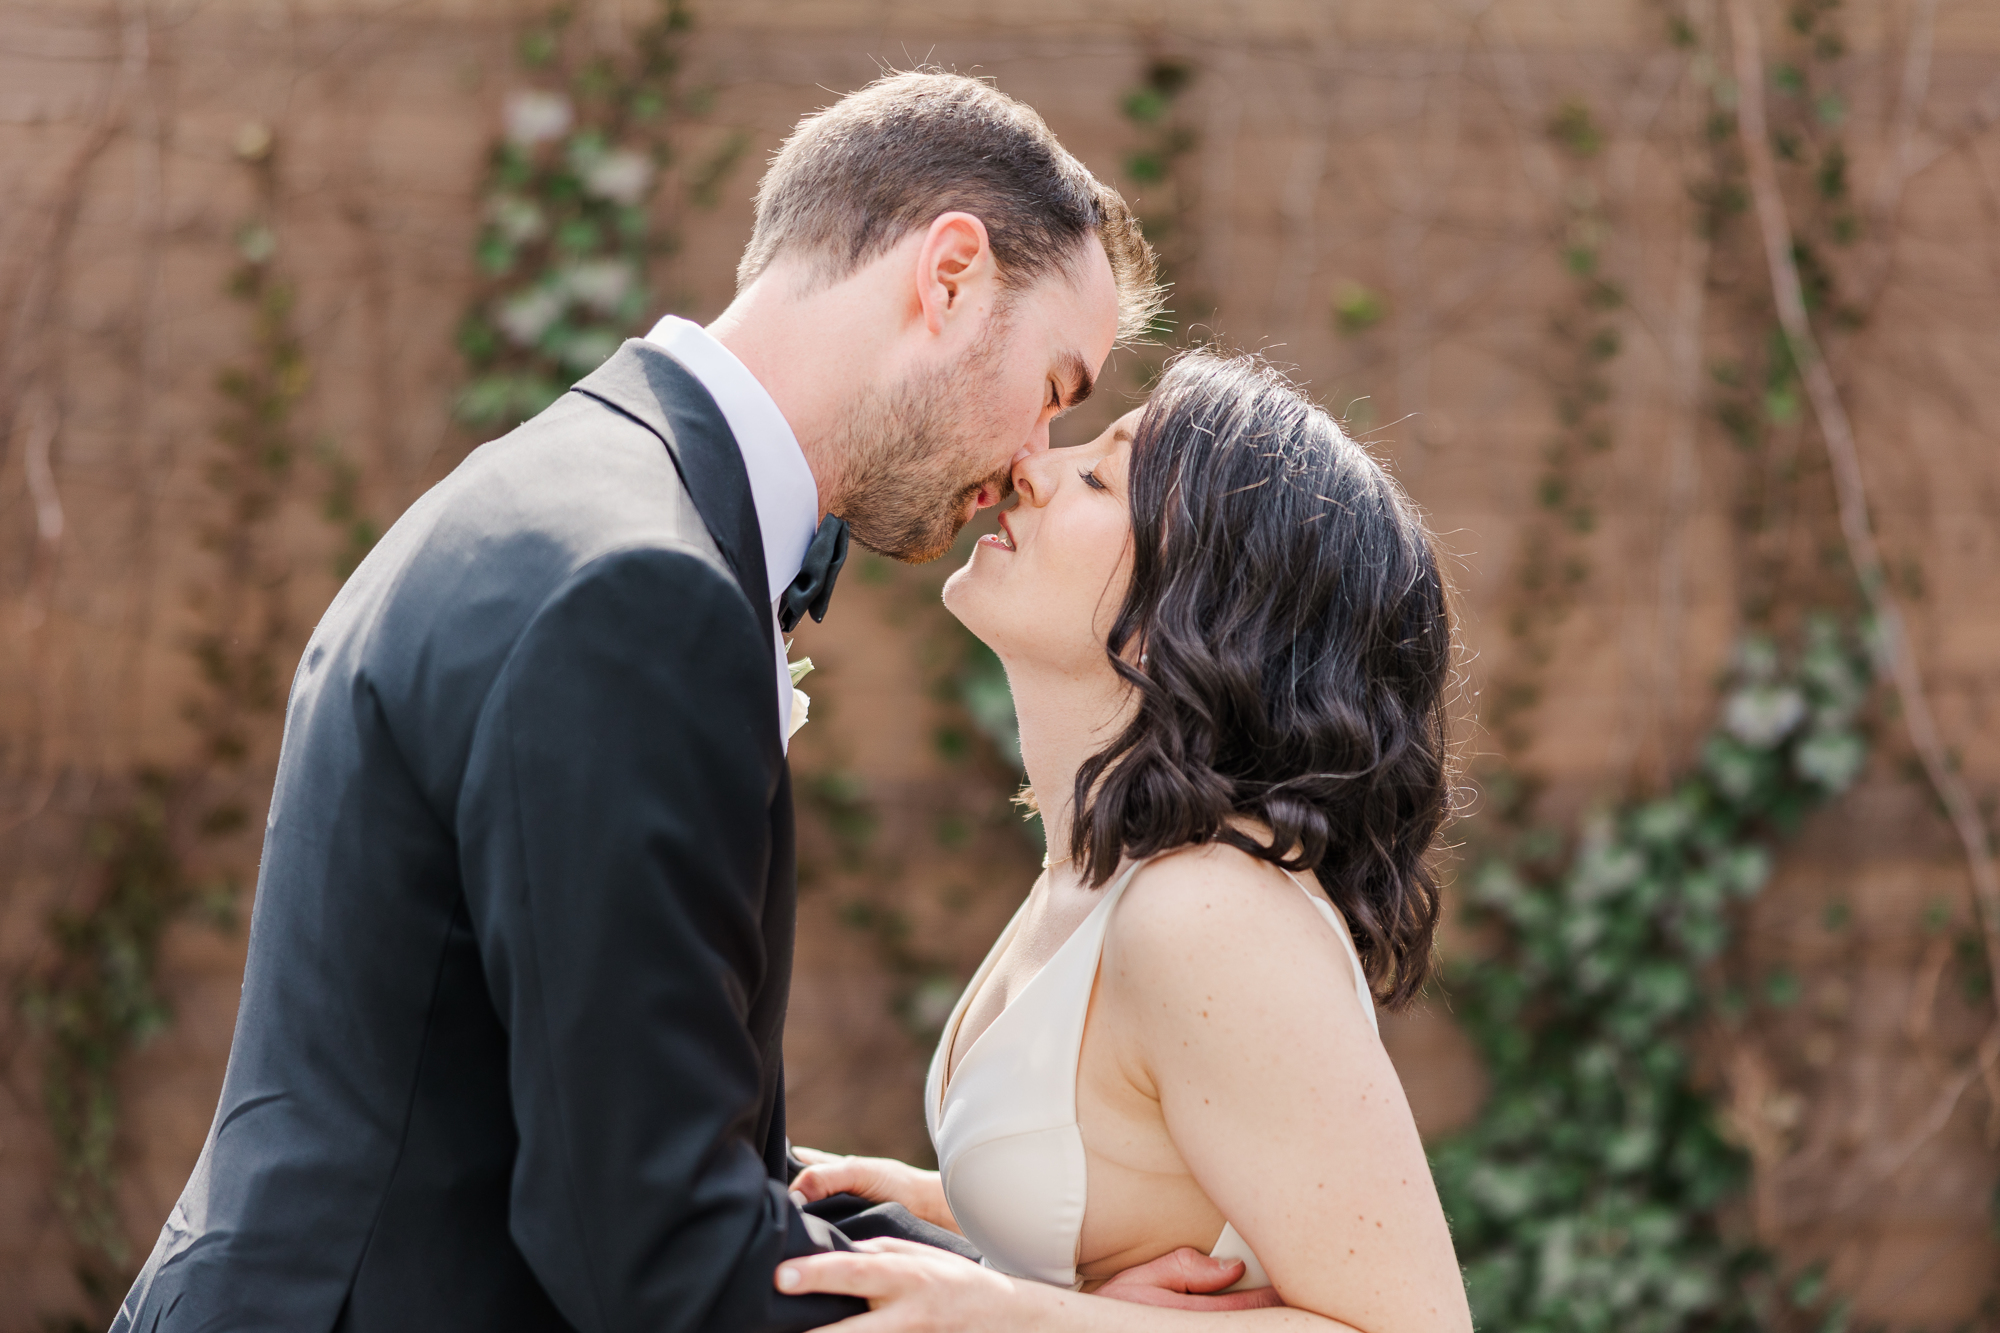 Romantic Spring Wedding Photos at The Green Building in Brooklyn NY